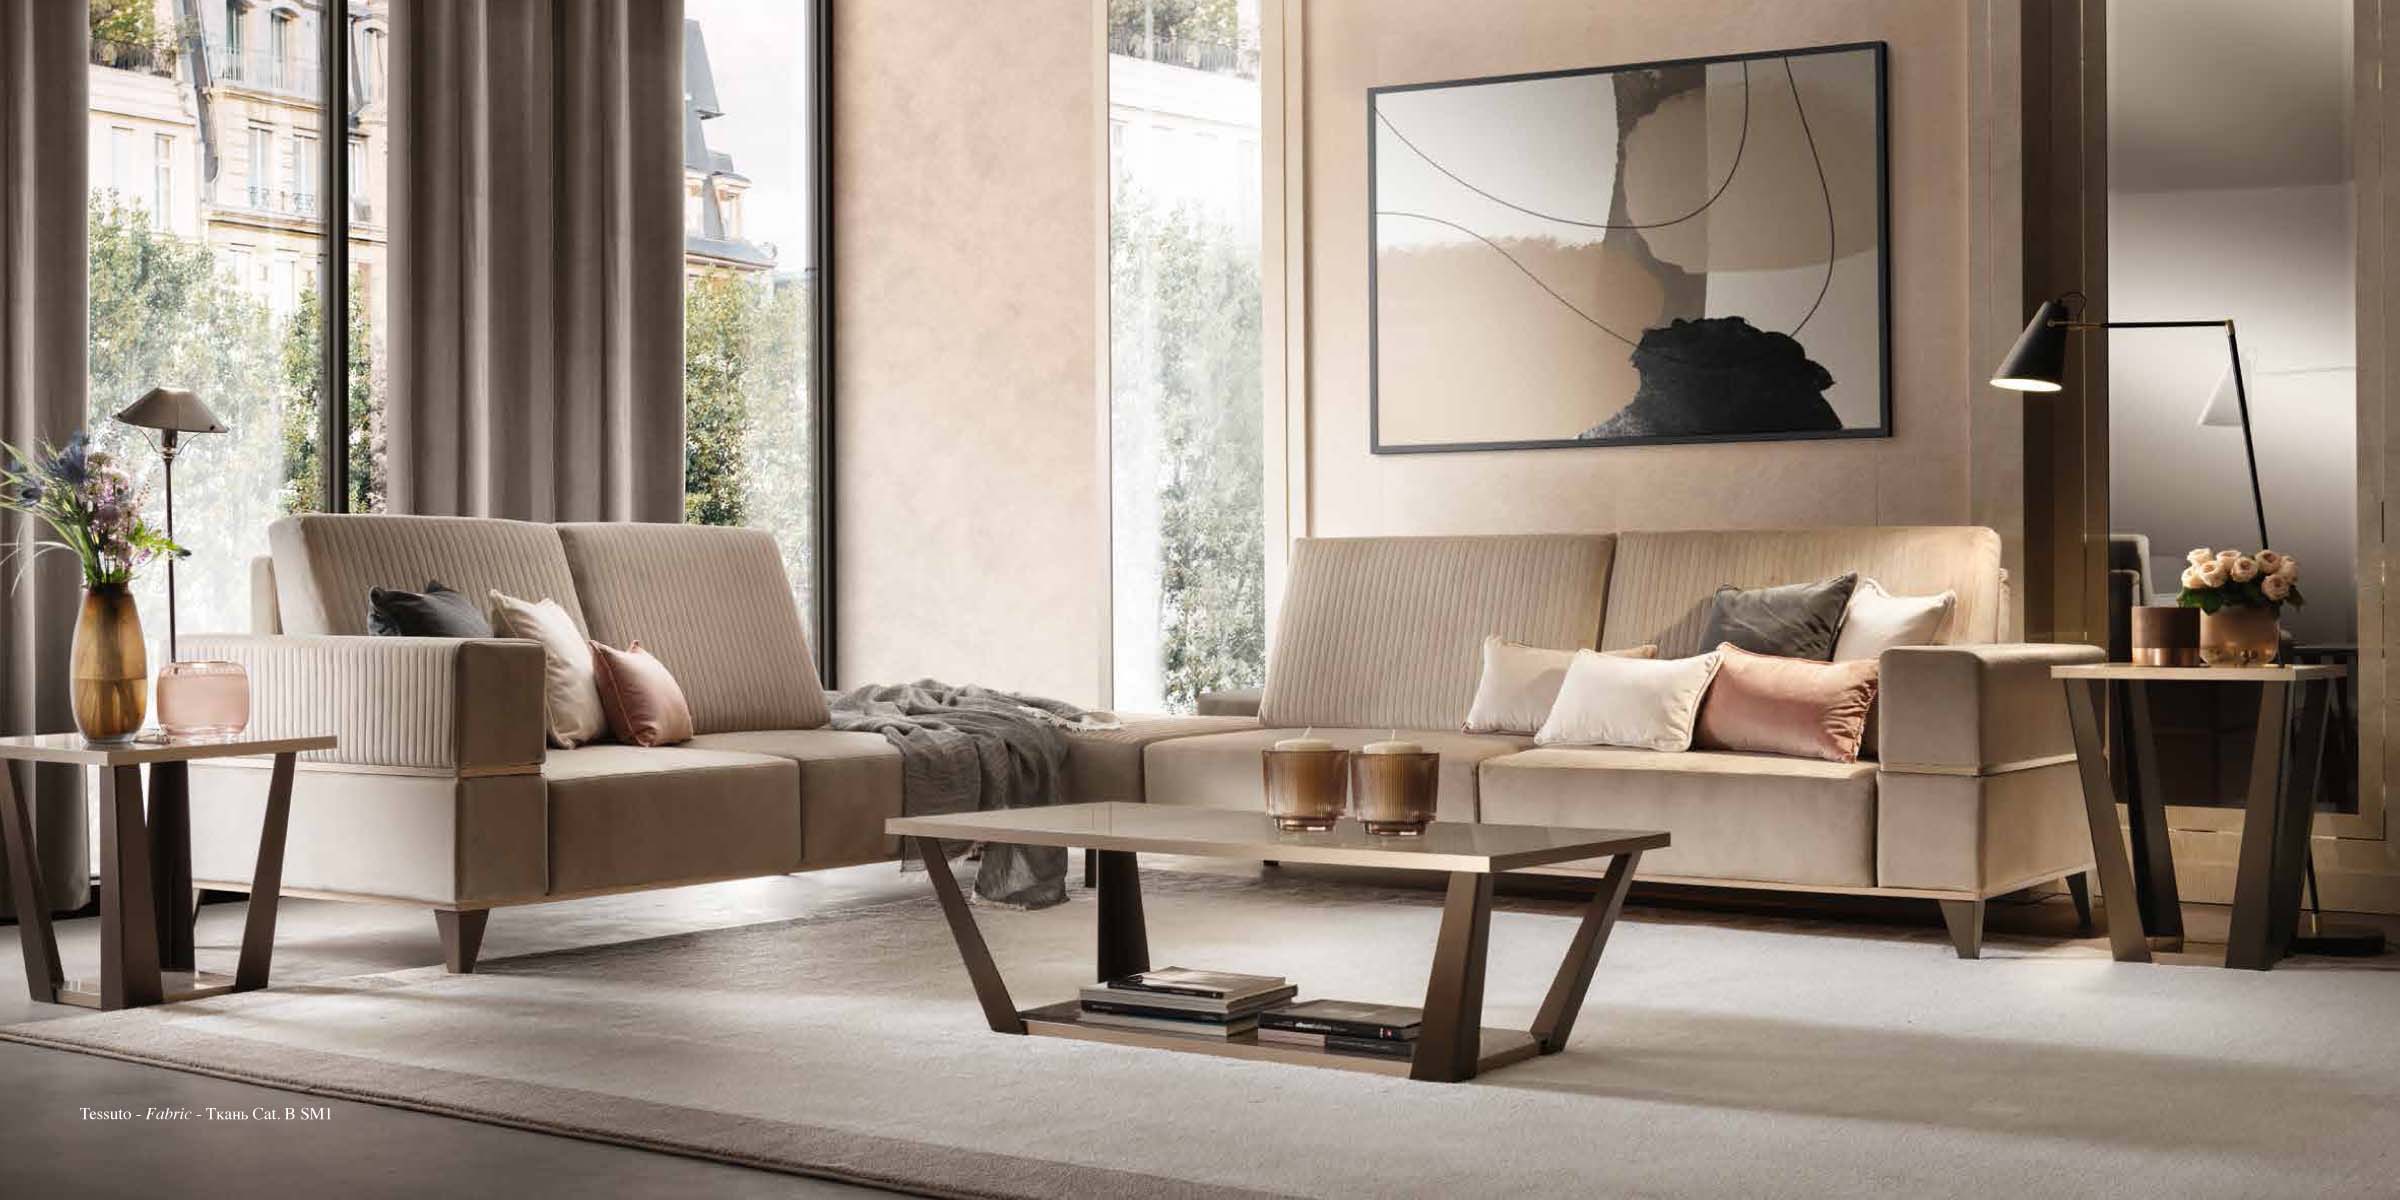 Brands Arredoclassic Living Room, Italy ArredoAmbra Living by Arredoclassic, Italy